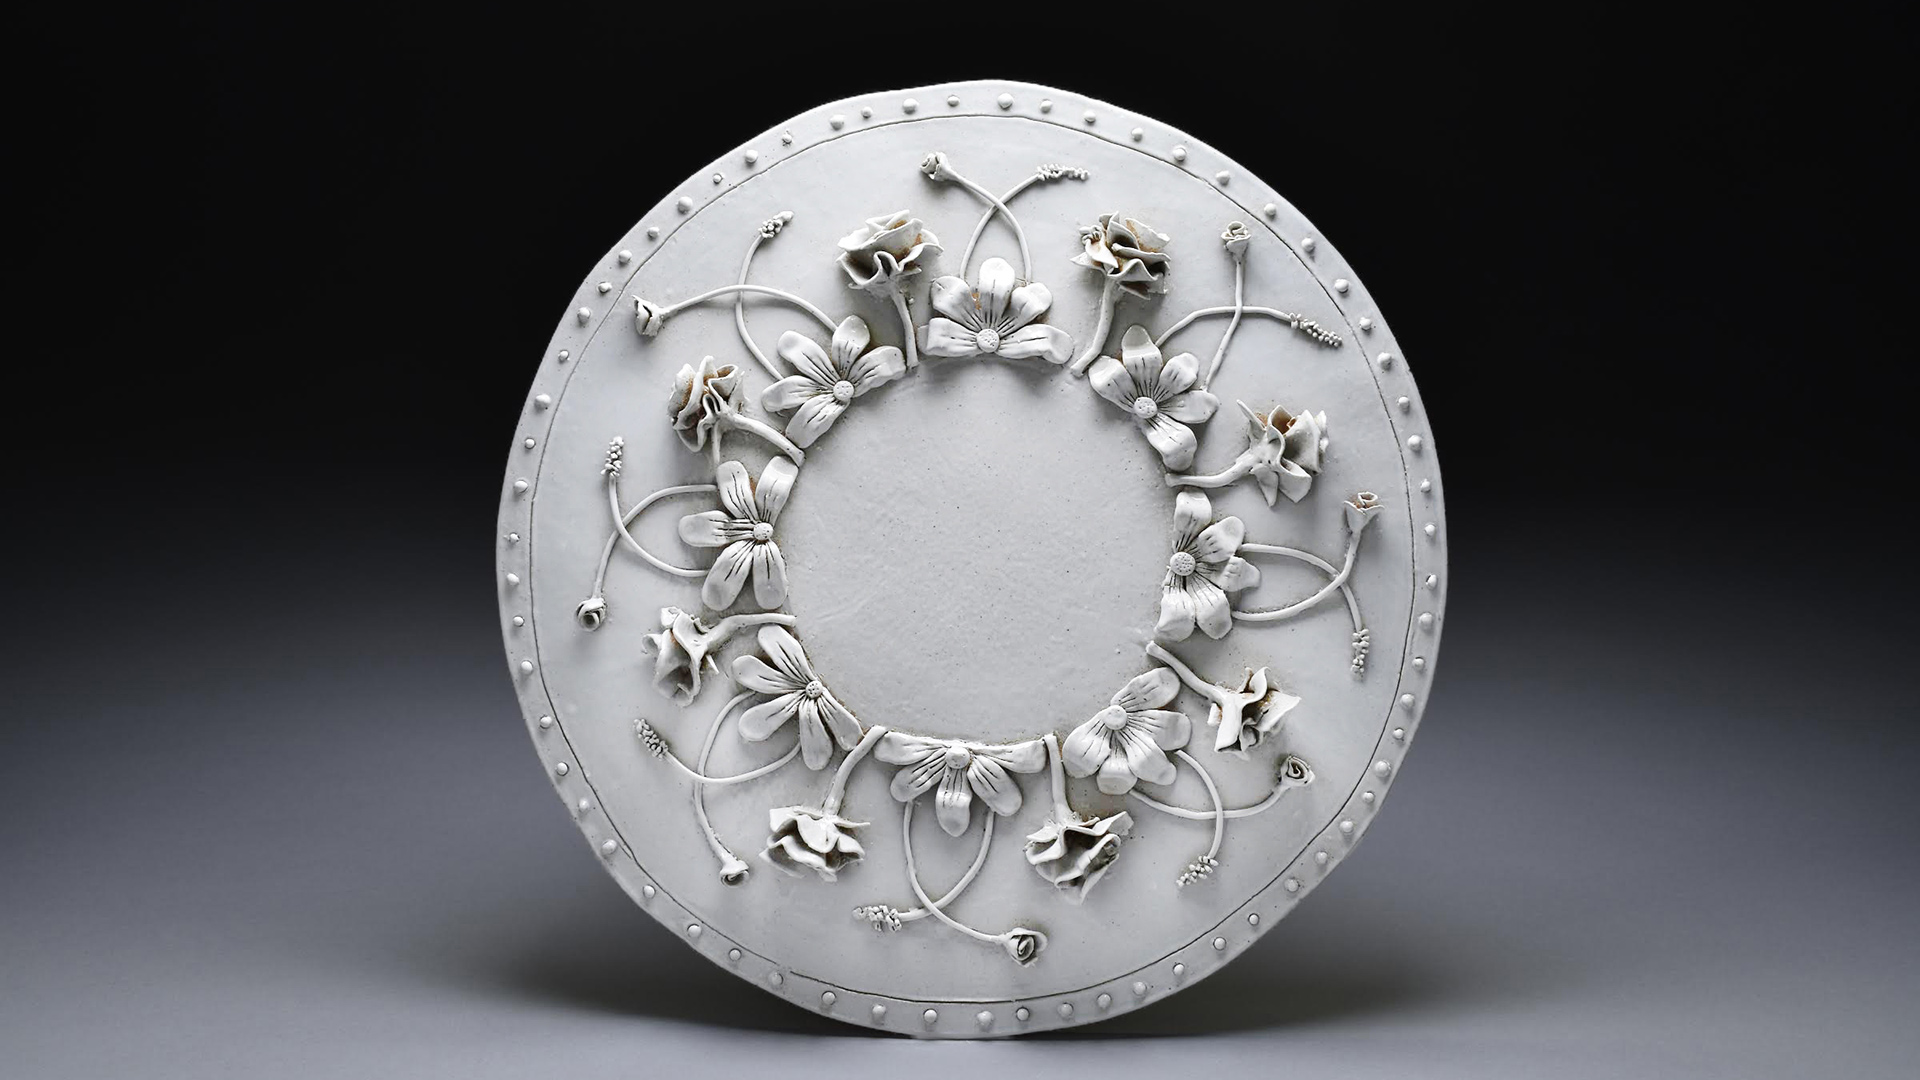 A pale ceramic plate decorated with twining flowers and vines